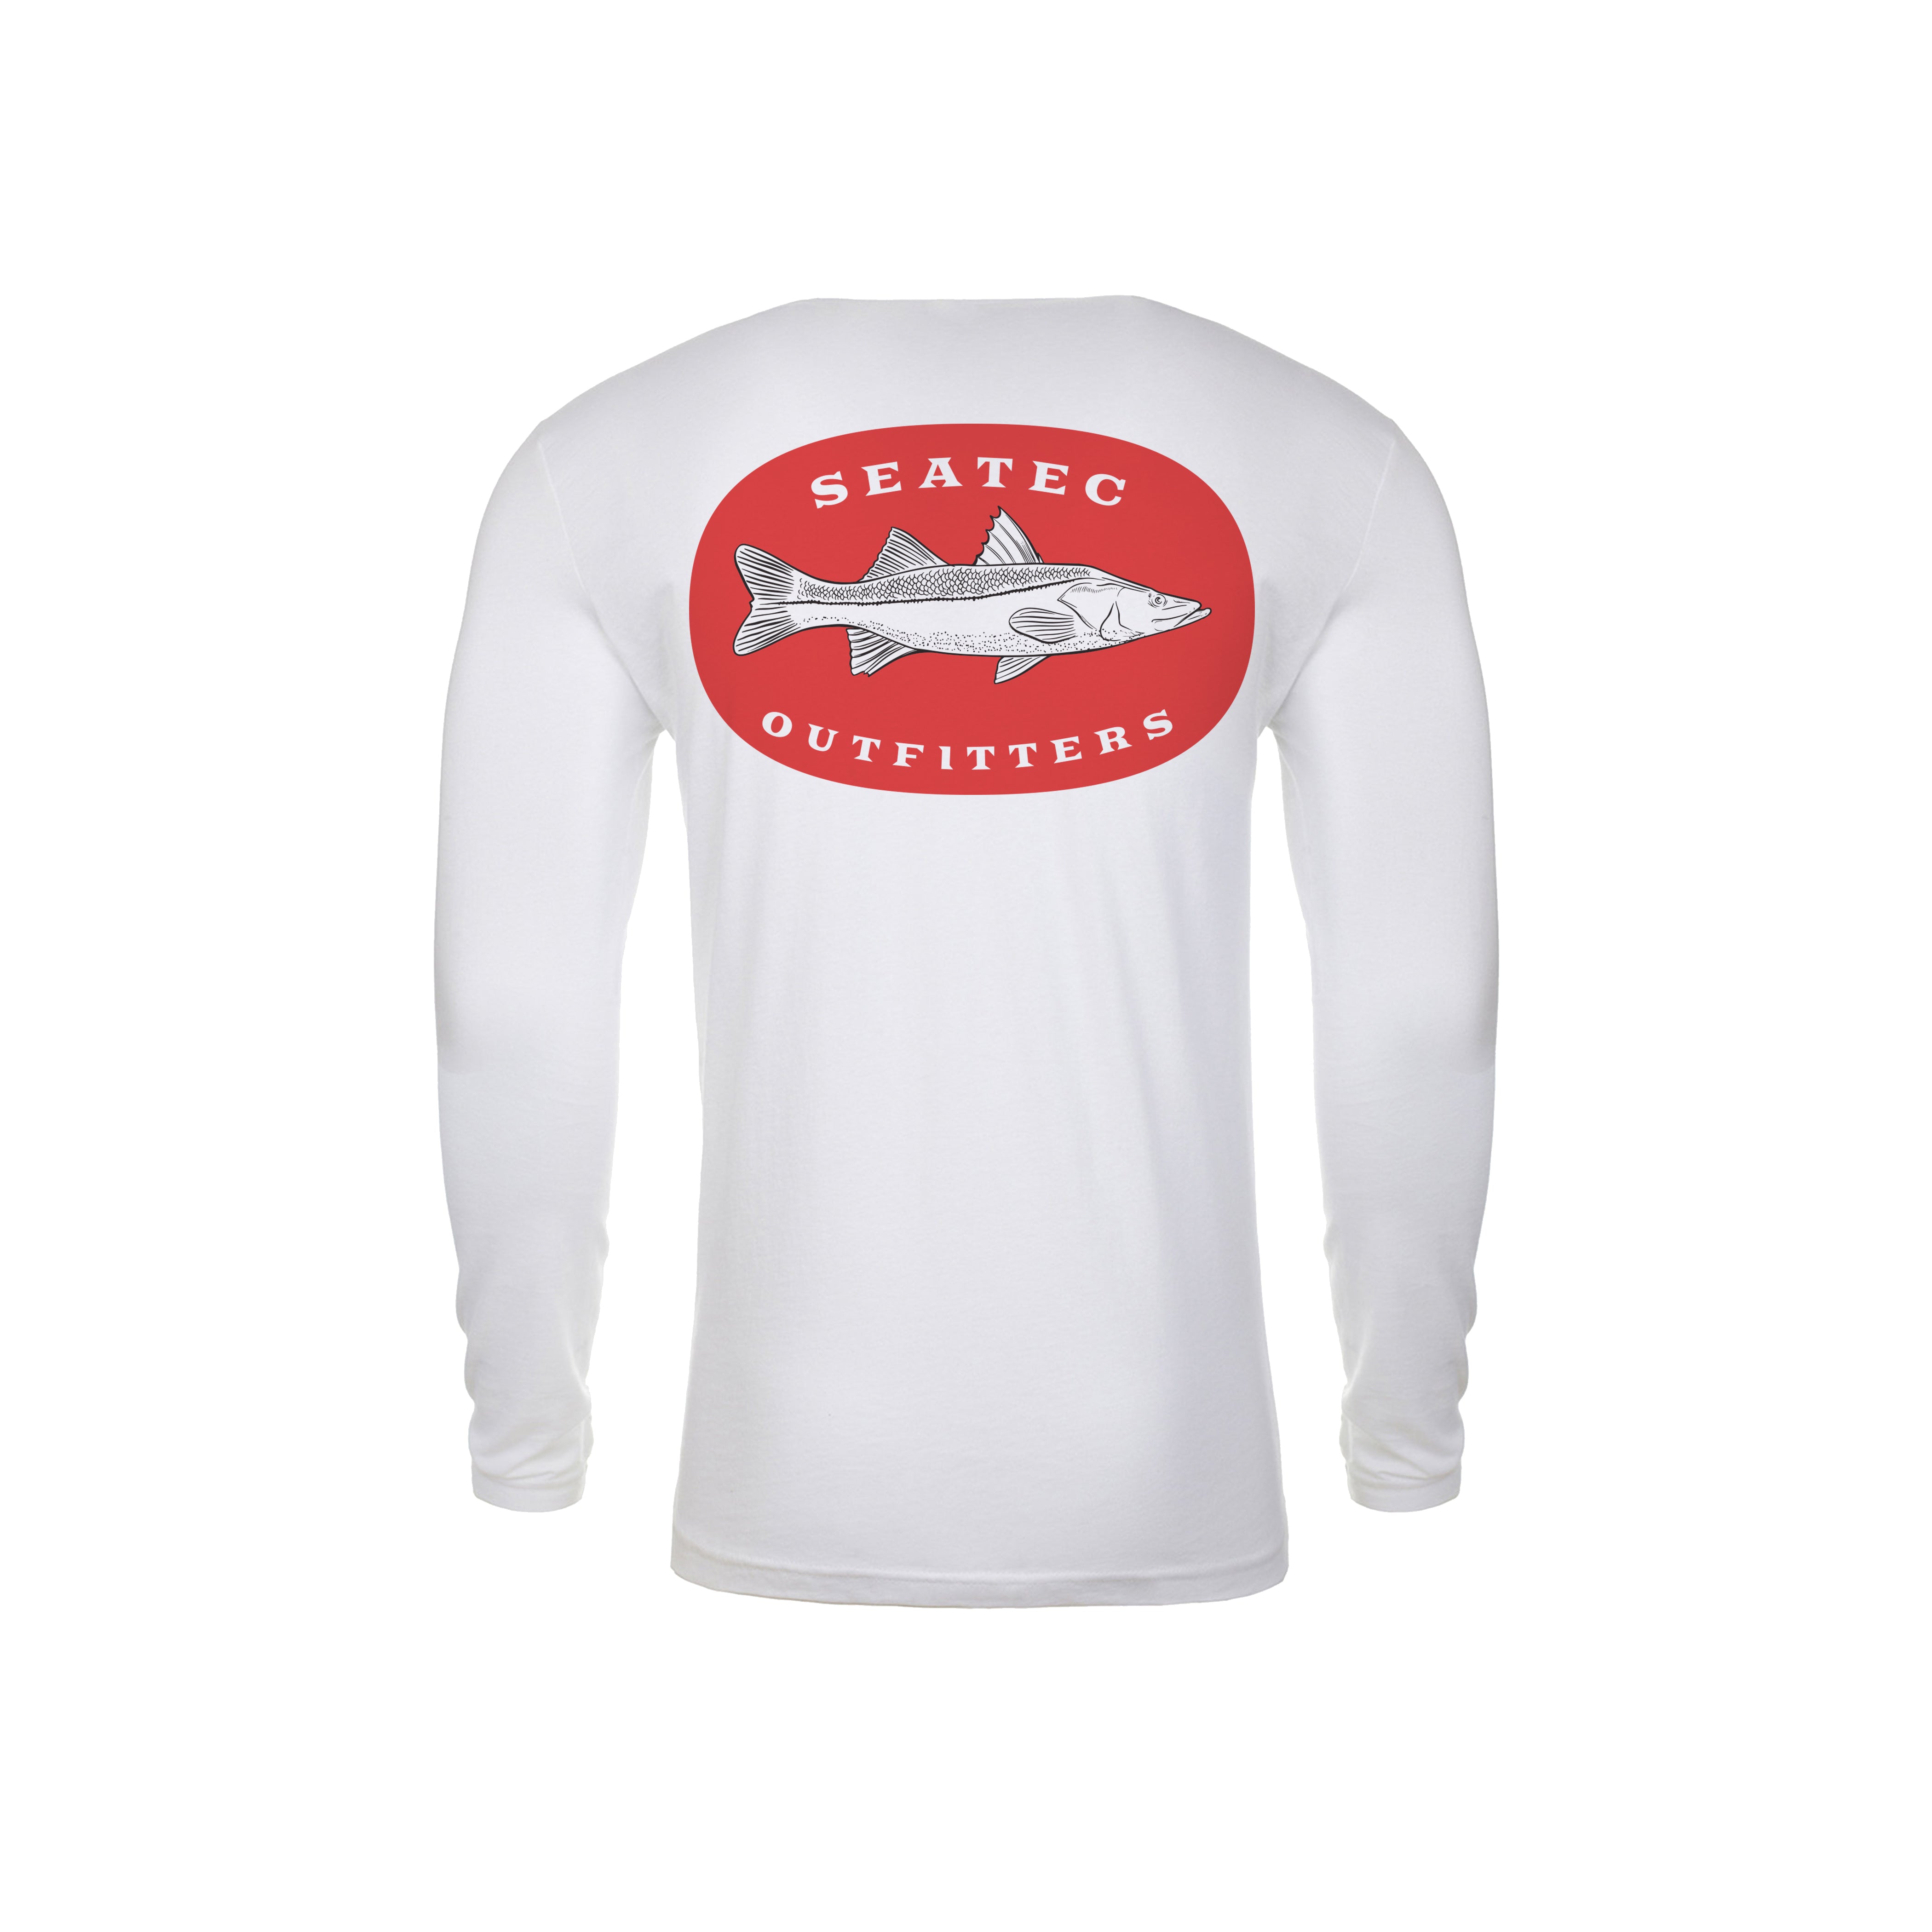 Seatec Outfitters Fly Long Sleeve Performance Shirt - UPF 50+, Snag  Resistant, Moisture Wicking